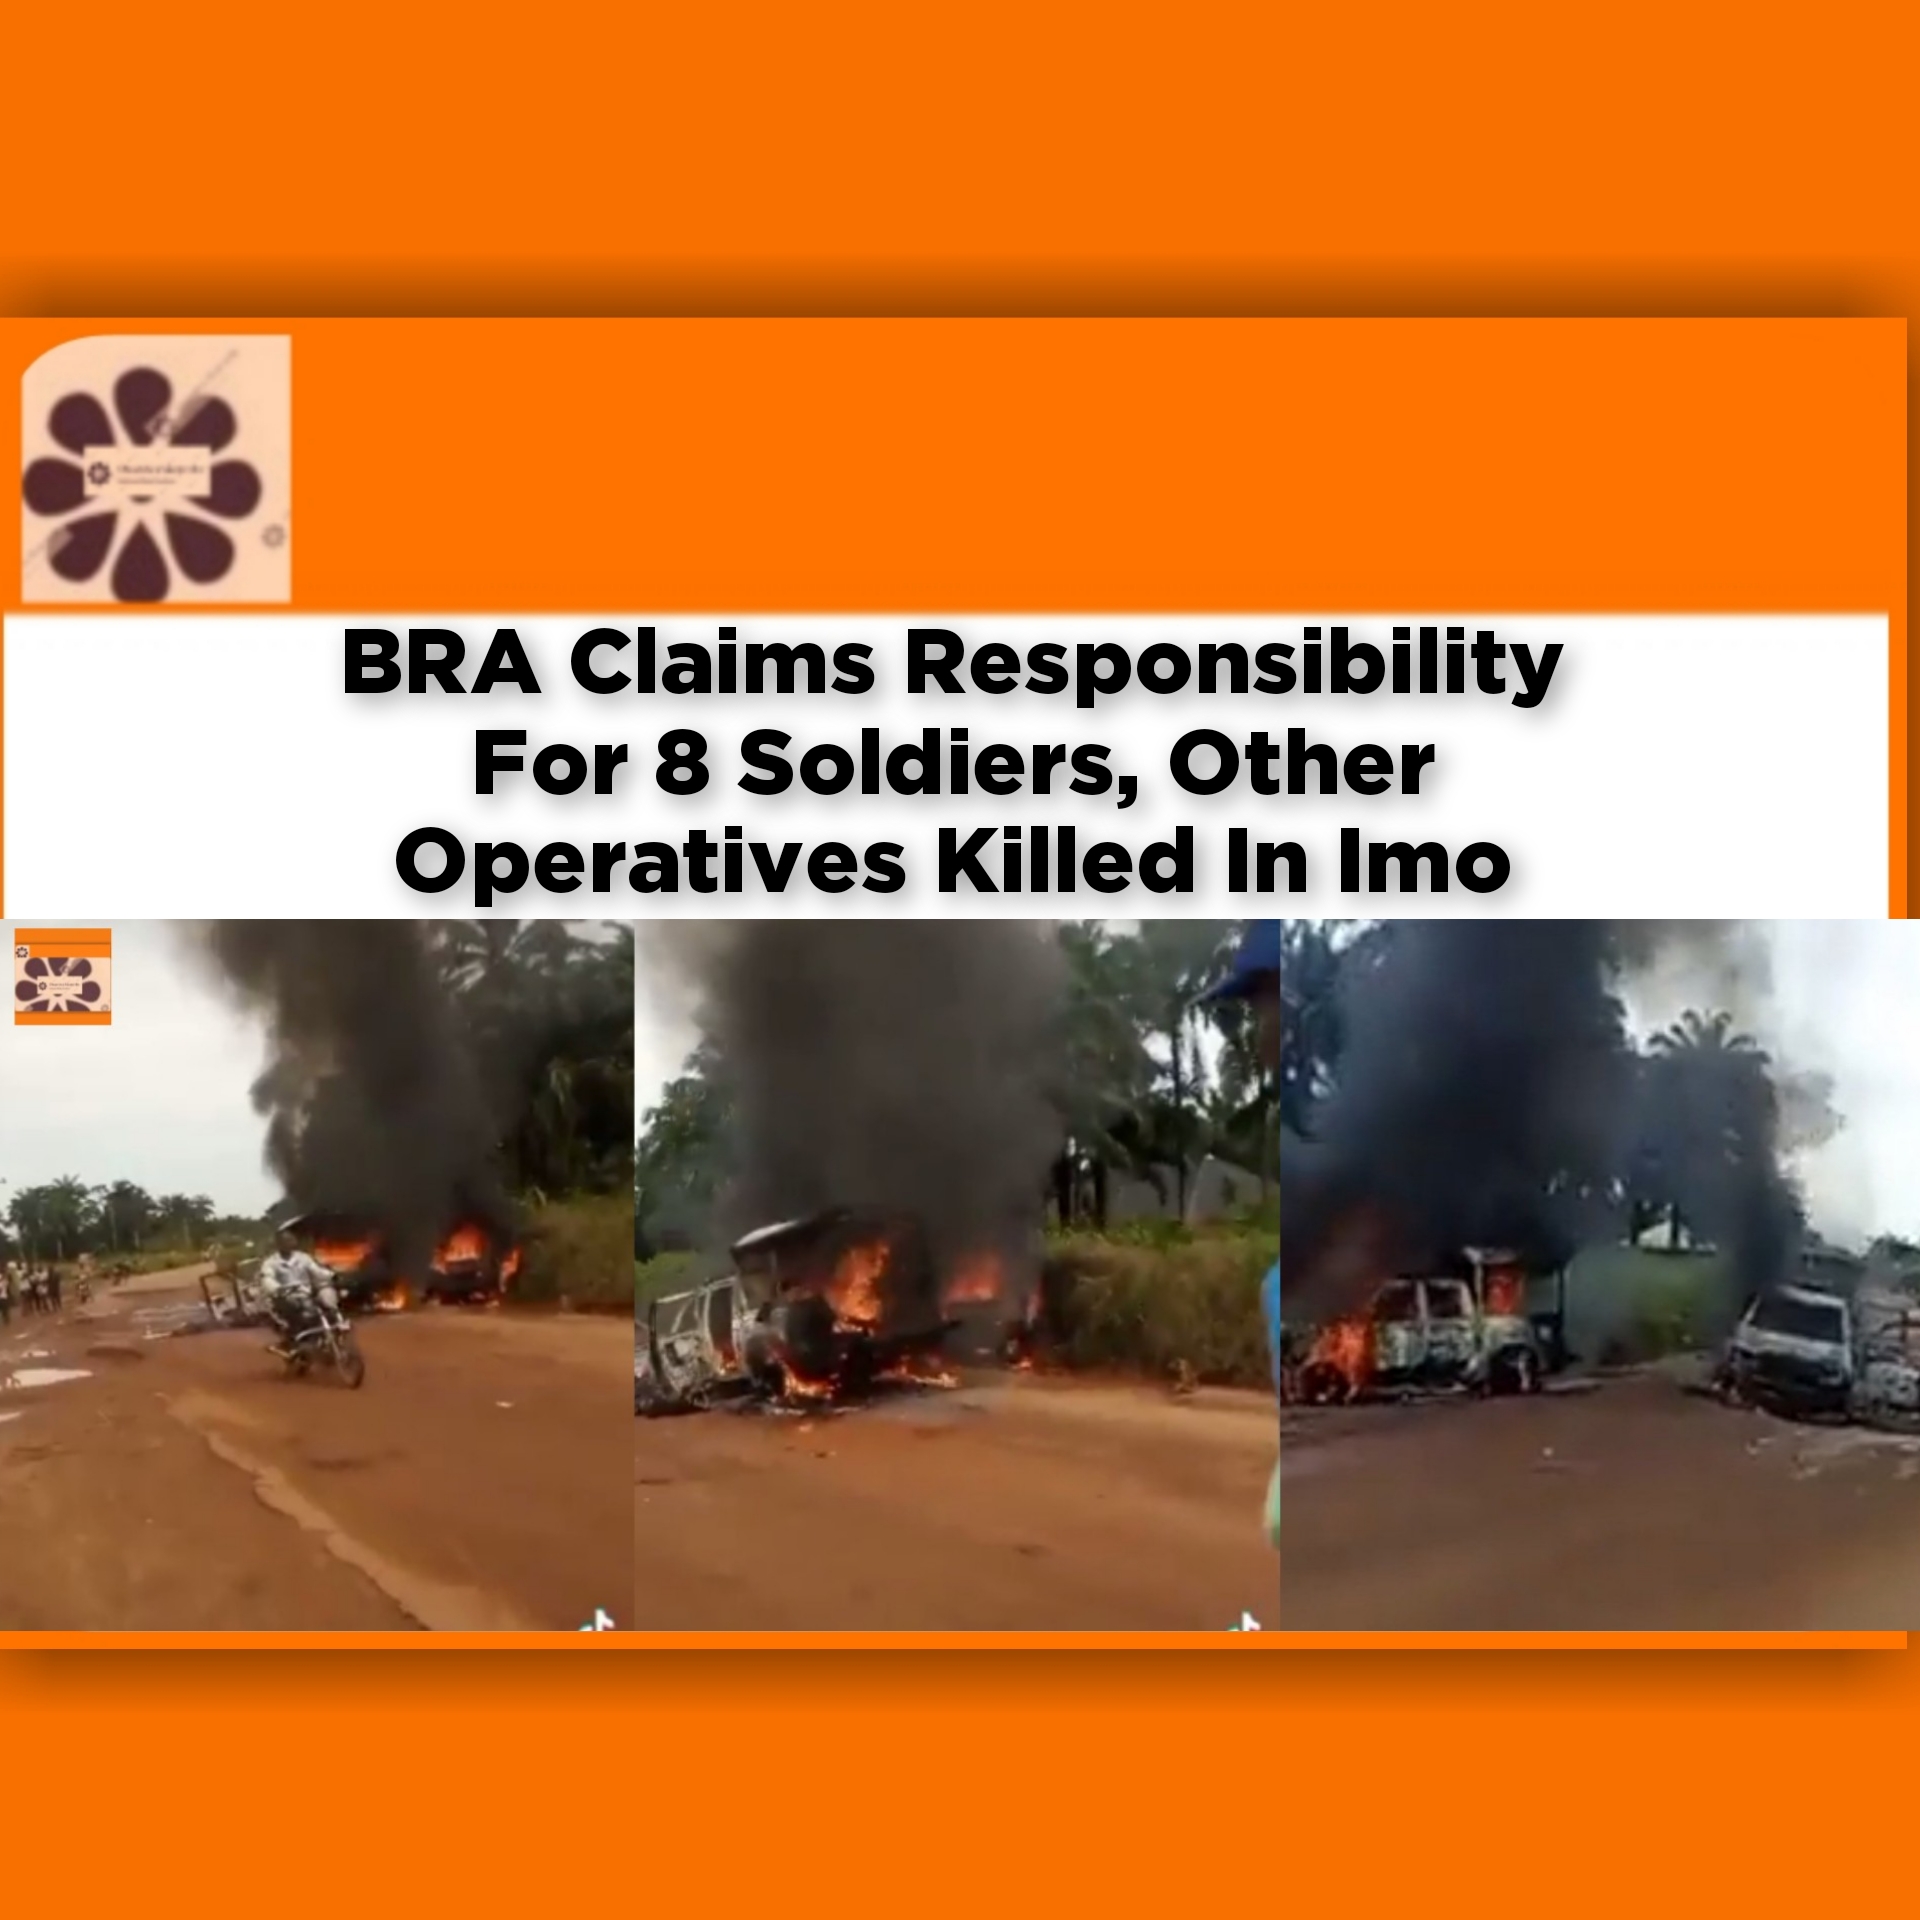 BRA Claims Responsibility For 8 Soldiers, Other Operatives Killed In Imo ~ OsazuwaAkonedo #Okechukwu